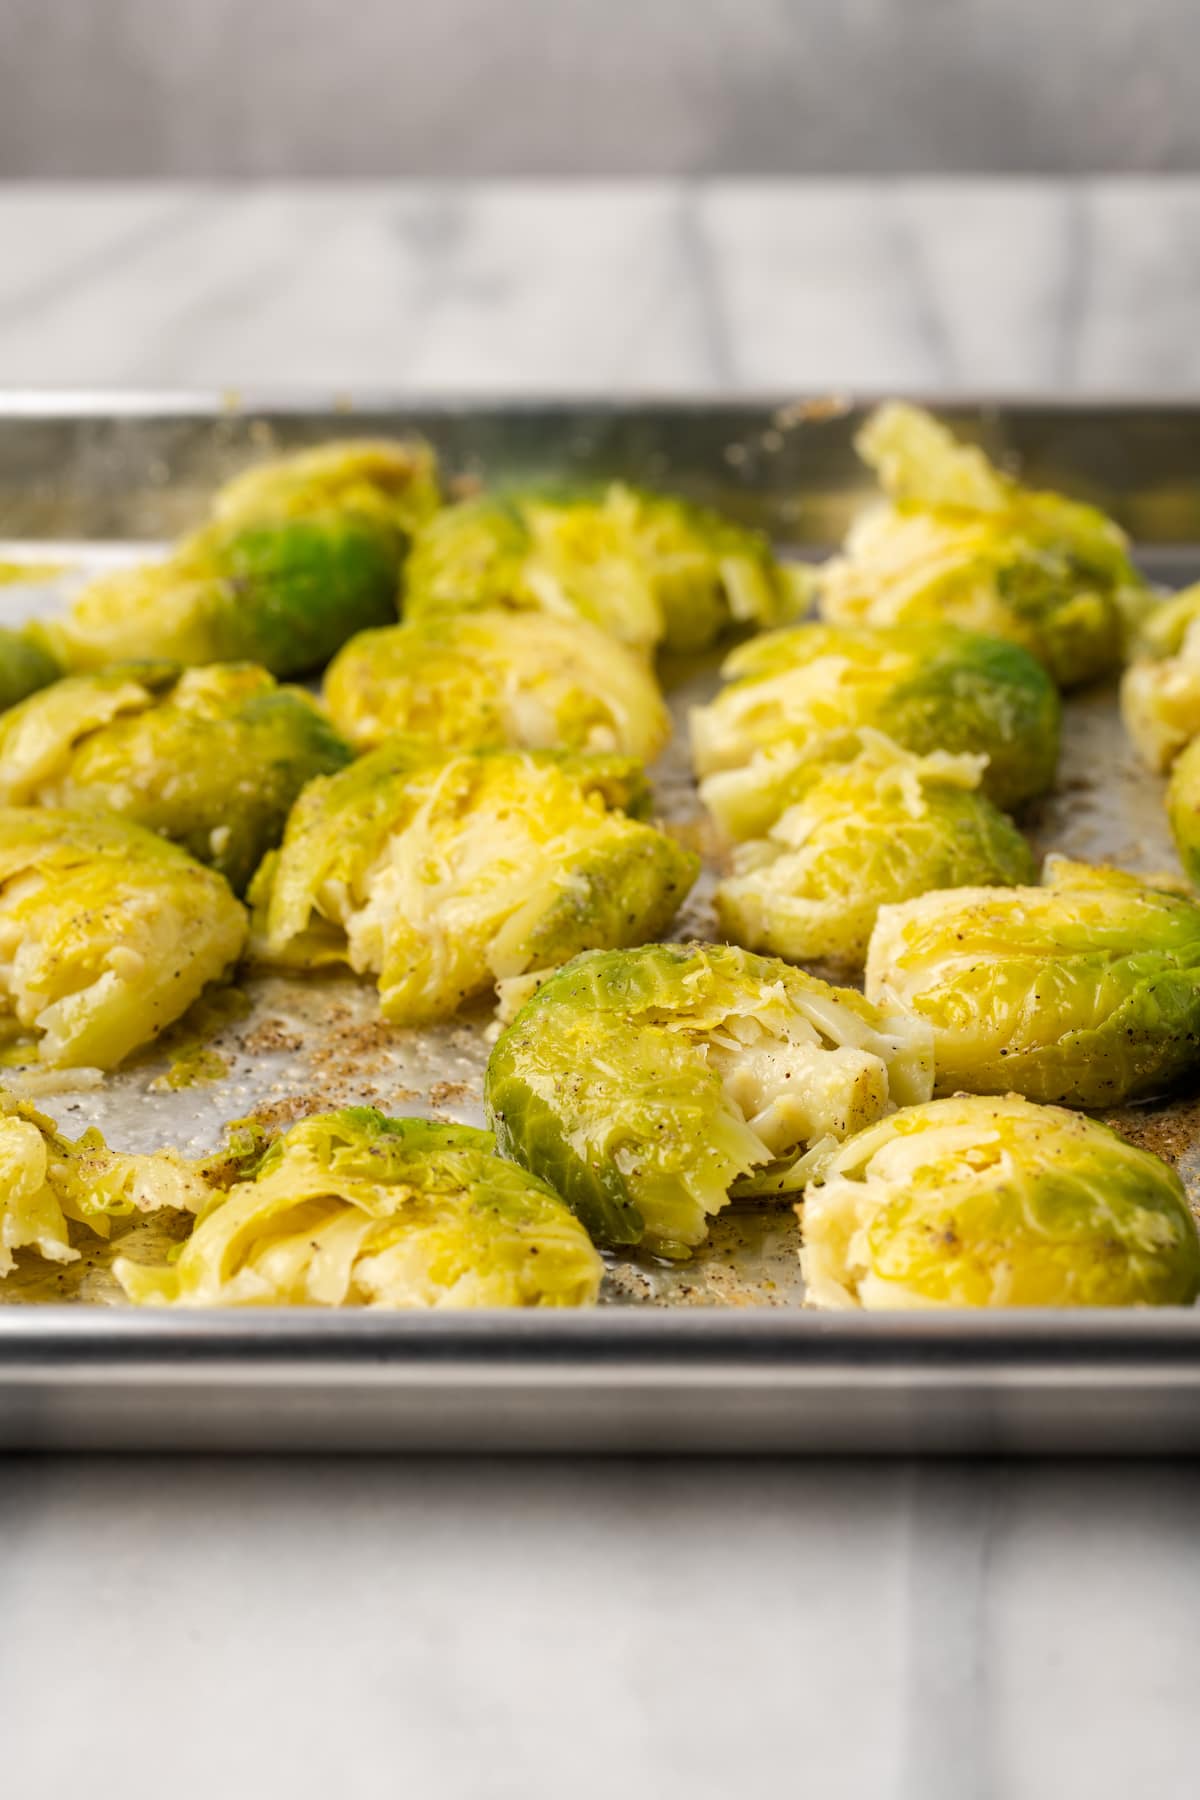 Smashed Brussels sprouts on sheet pan before baking